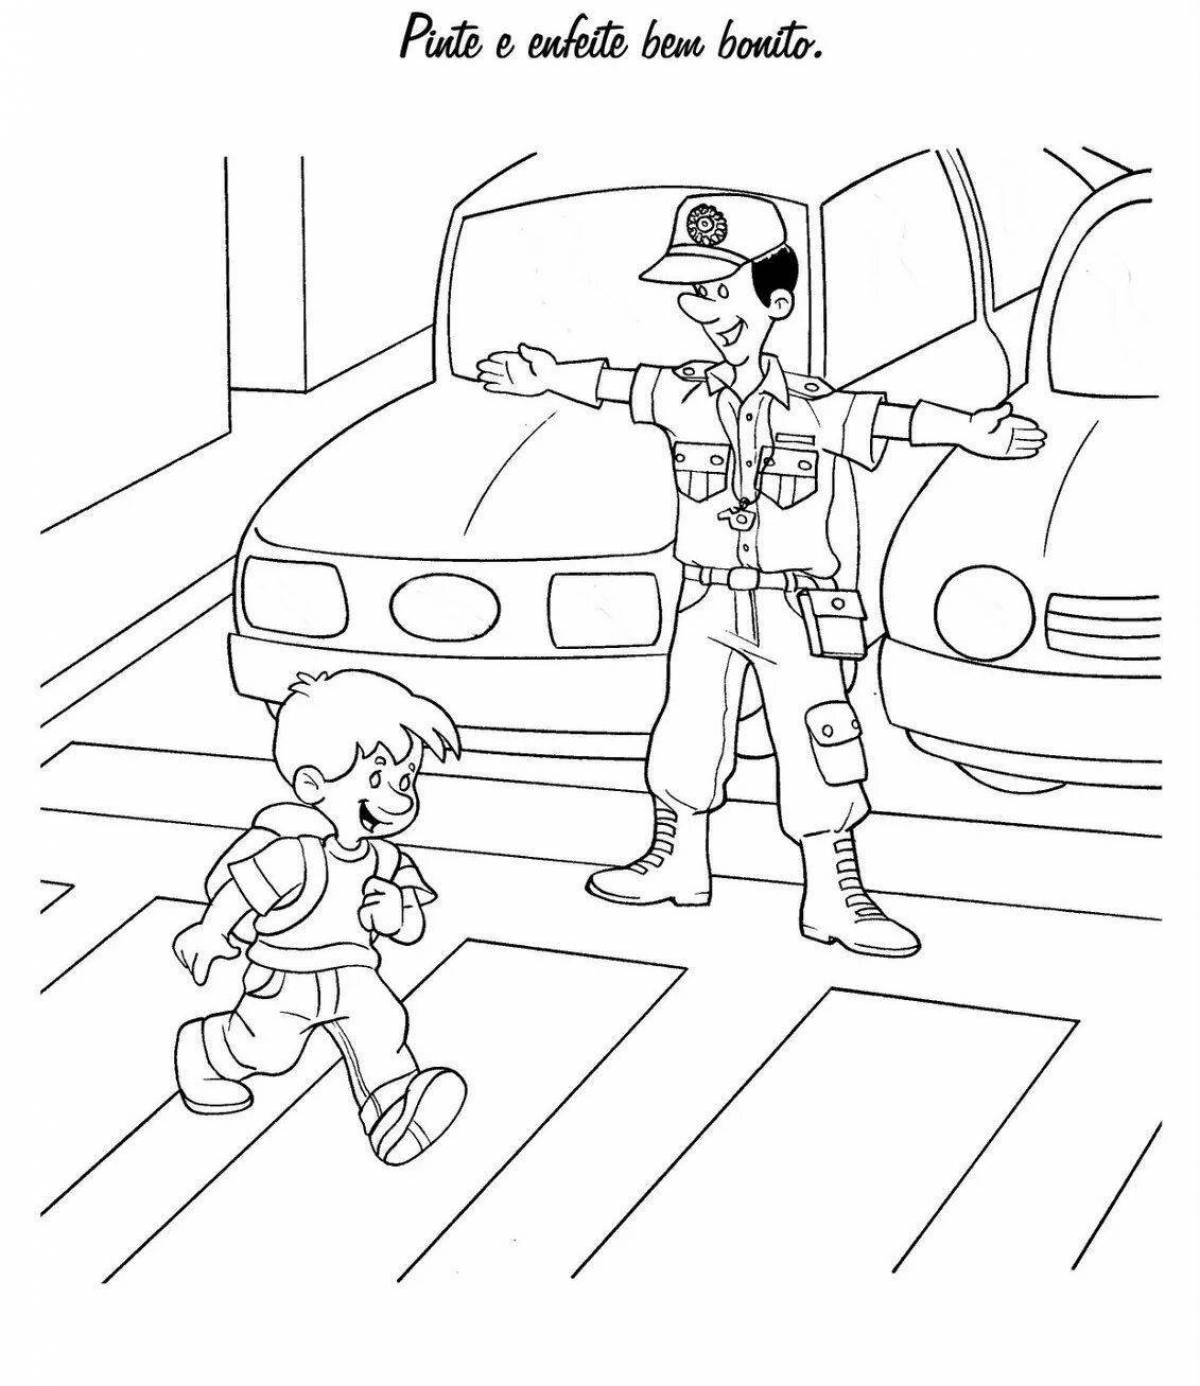 Sweet juid coloring page for kids